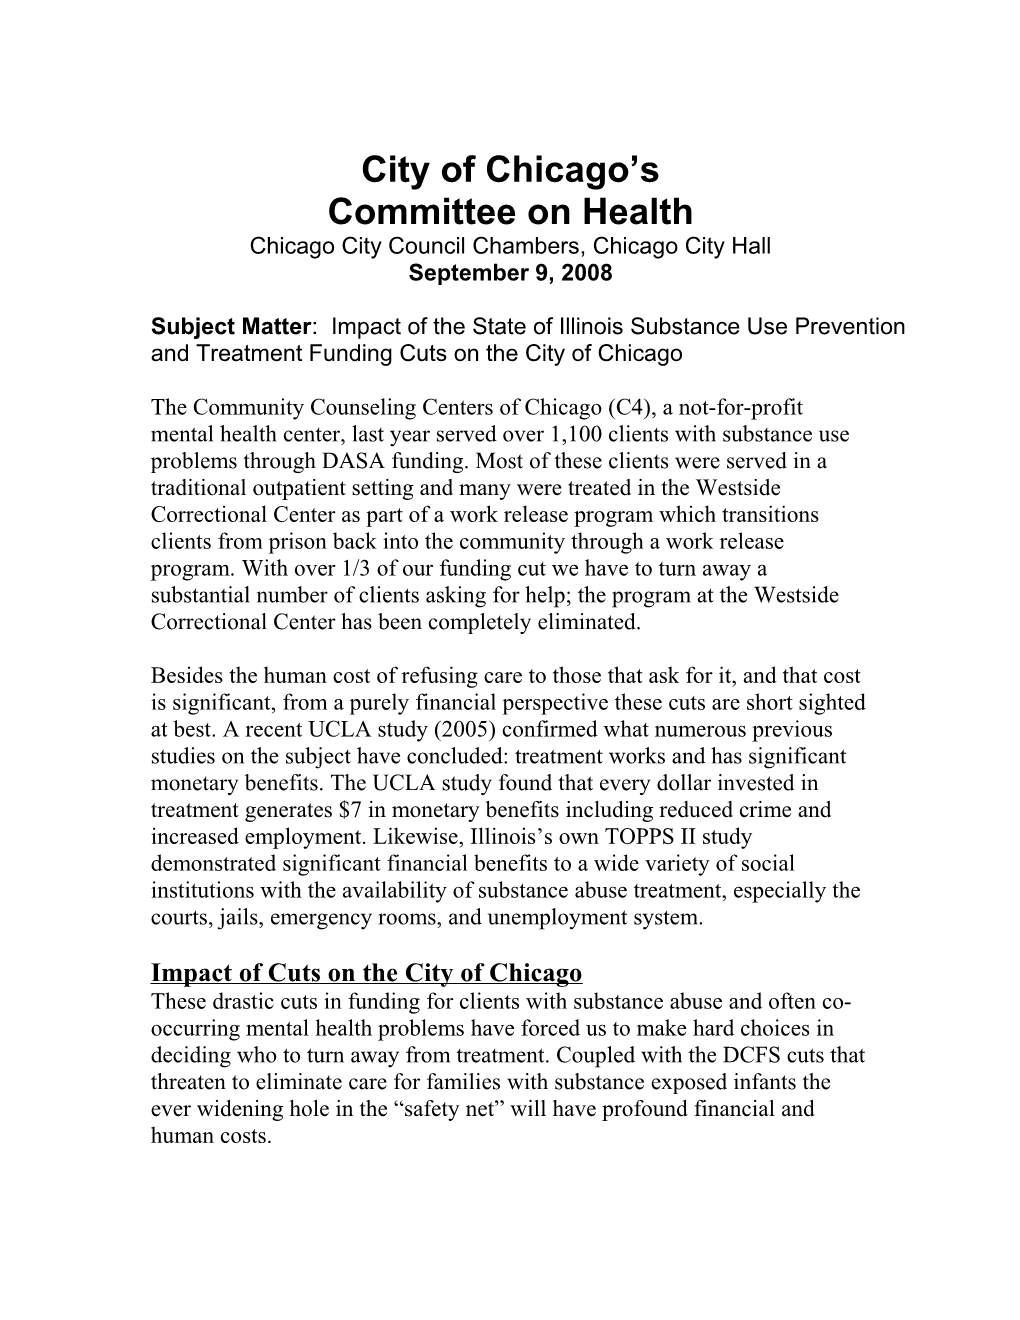 The Community Counseling Centers of Chicago (C4), a Not-For-Profit Mental Health Center